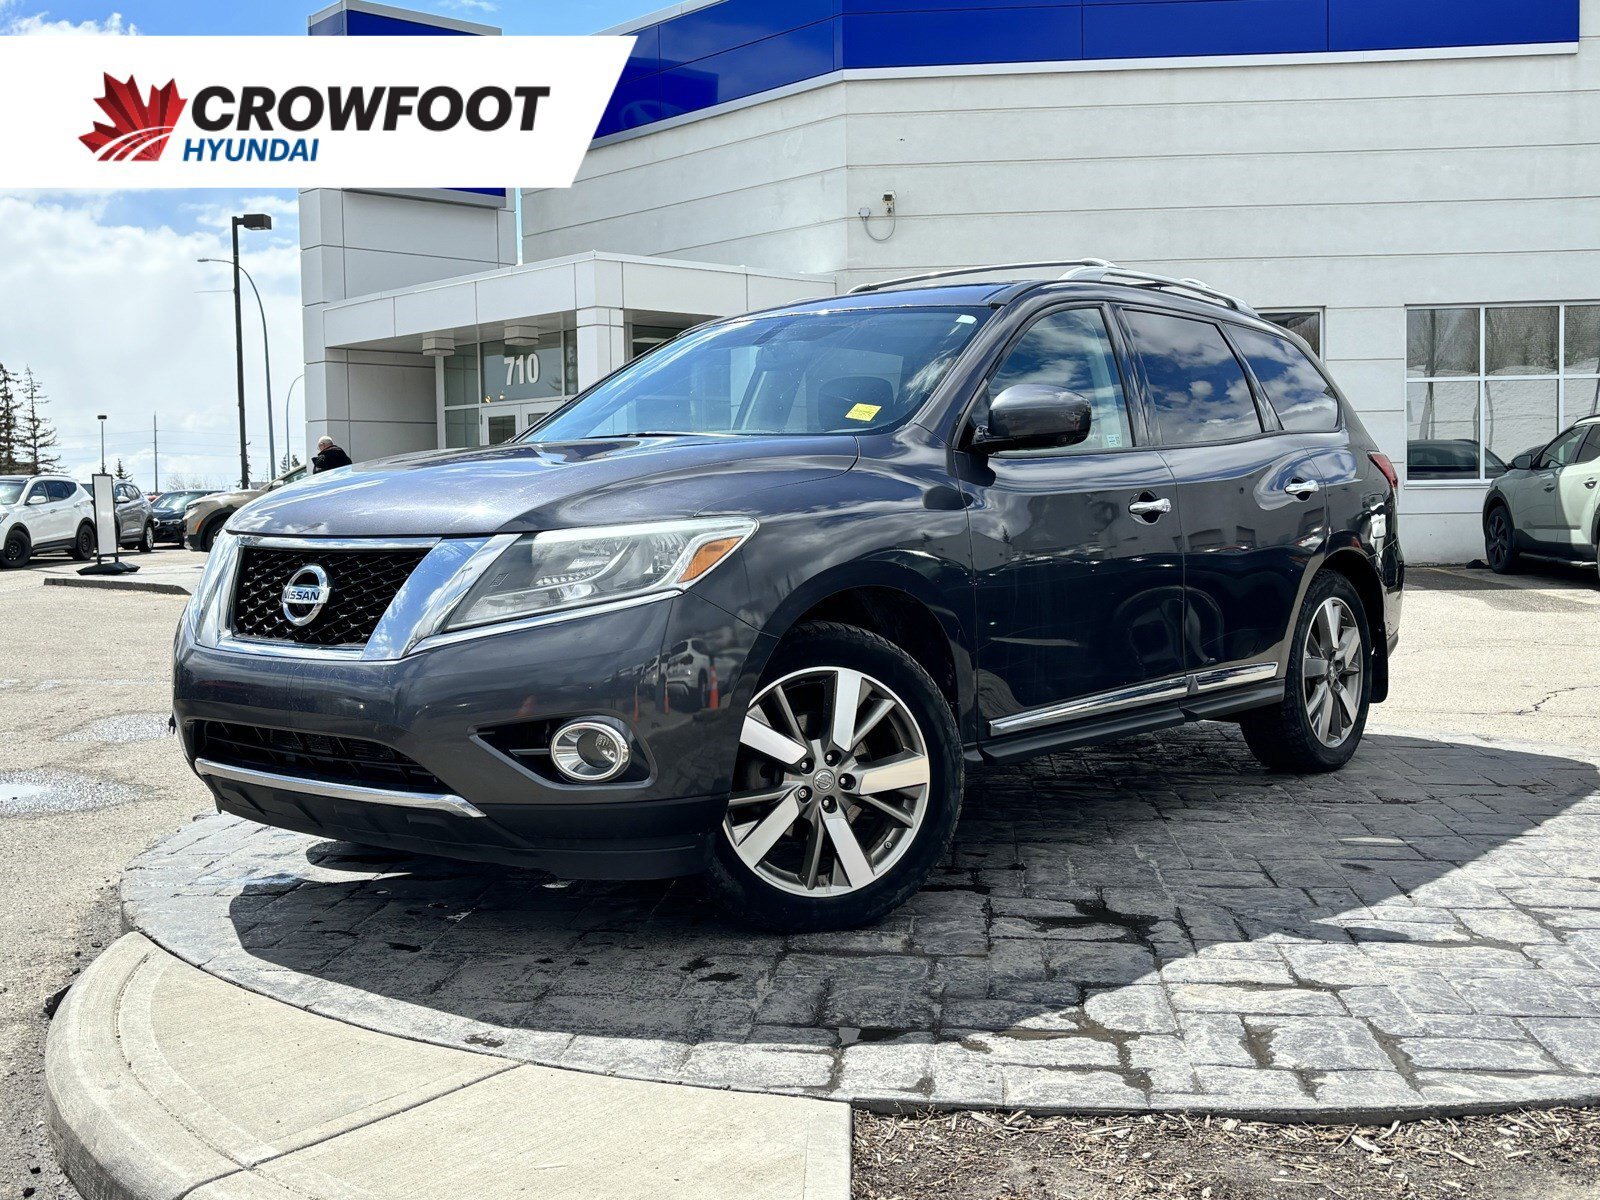 2014 Nissan Pathfinder Platinum - 4WD, No Accidents, One Owner, Keyless E